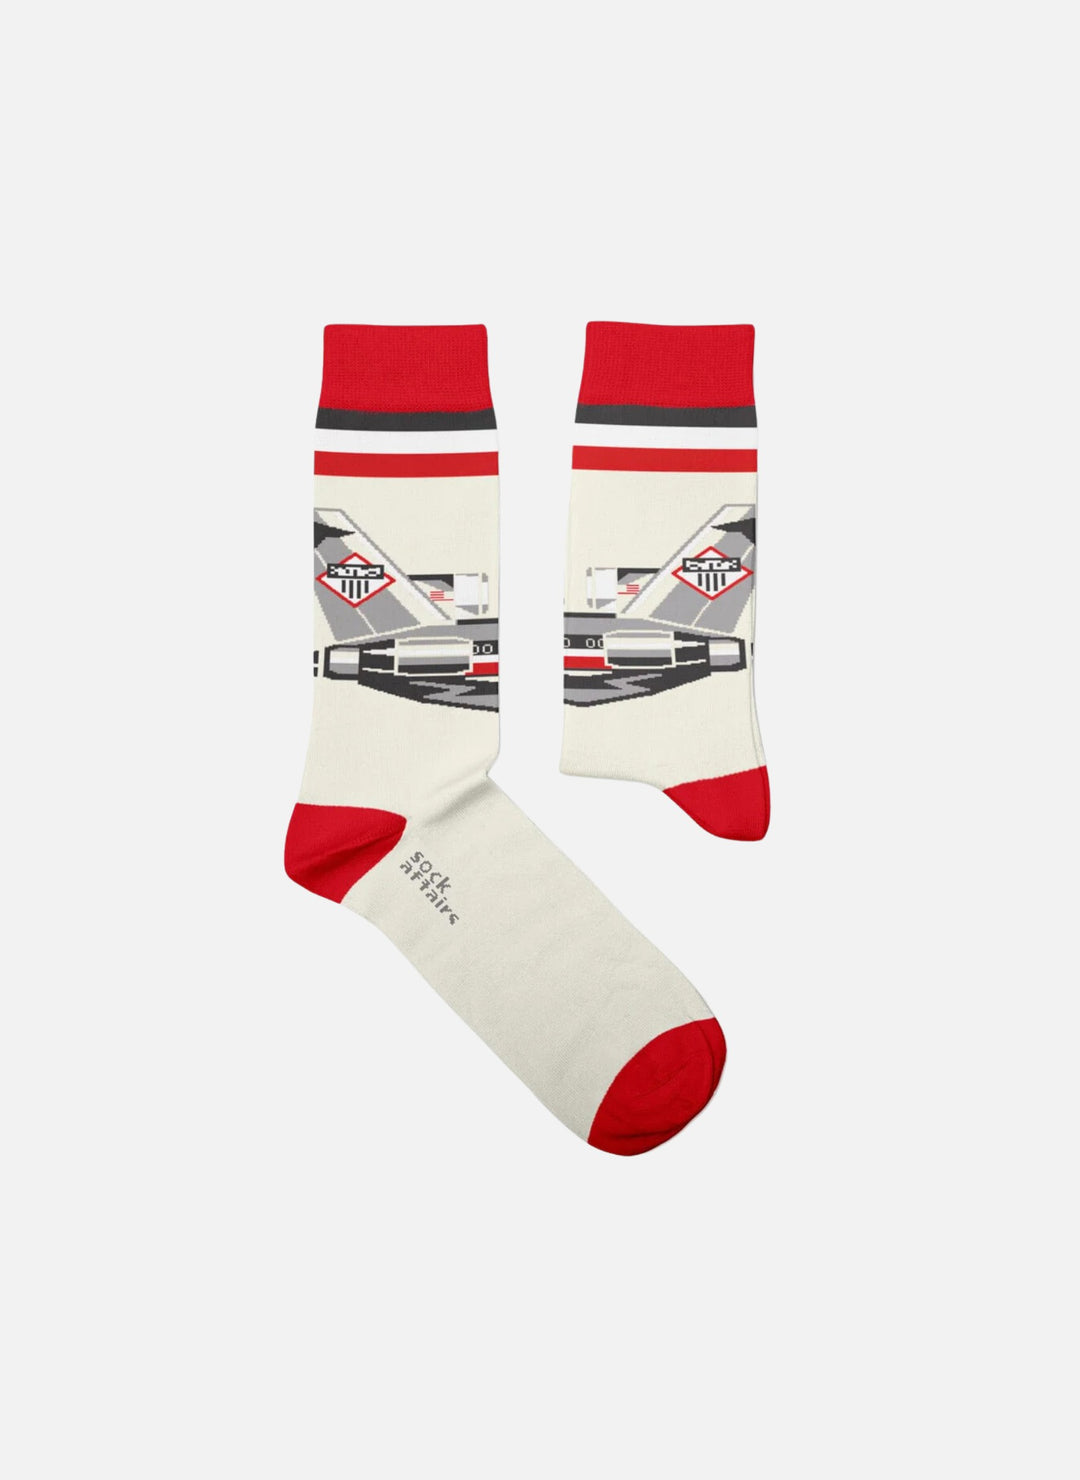 Chaussettes Licensed to III, Beastie Boys